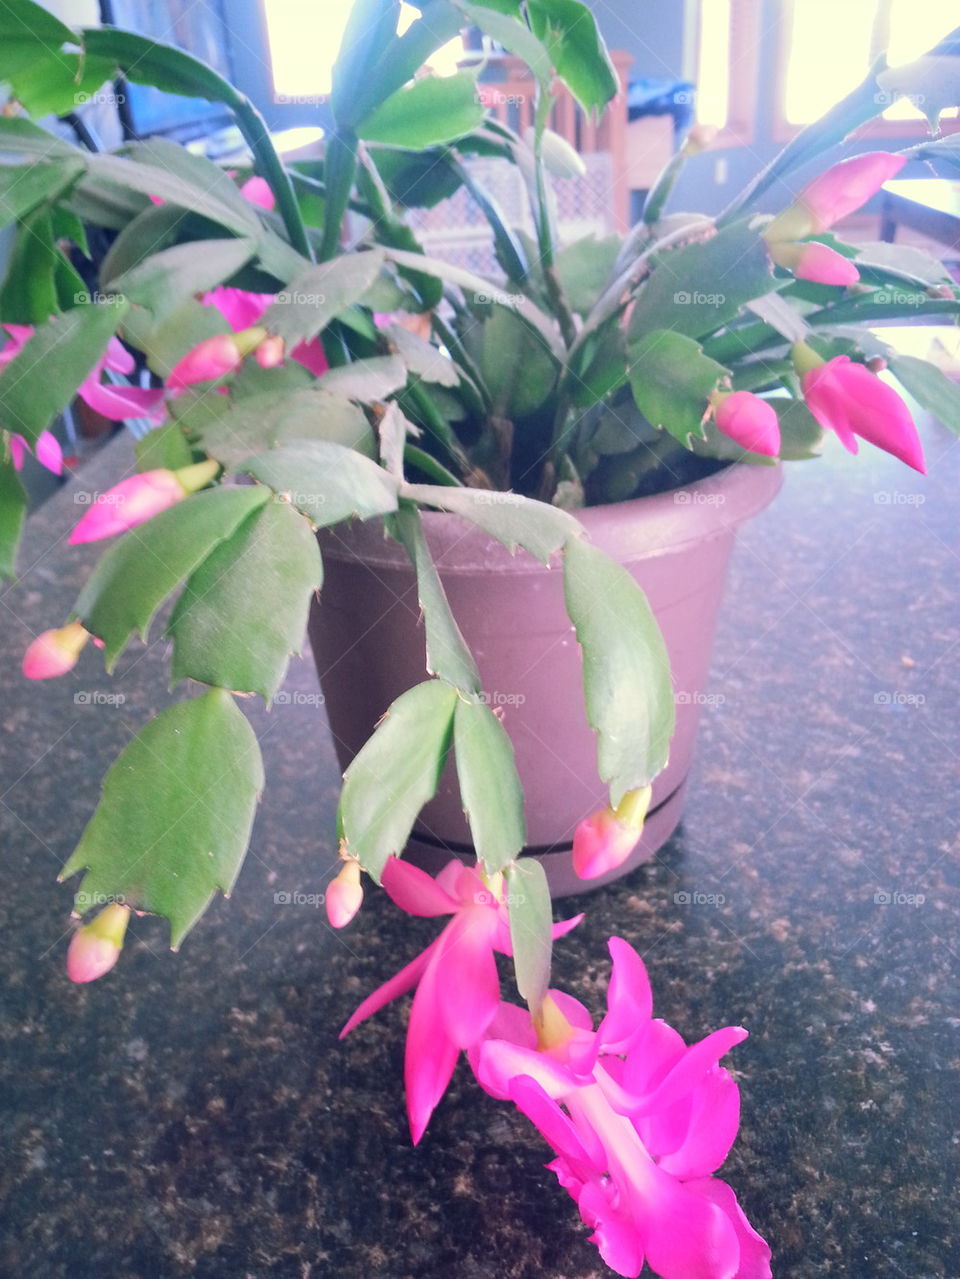 christmas cactus. Hot pink blooms, plant!